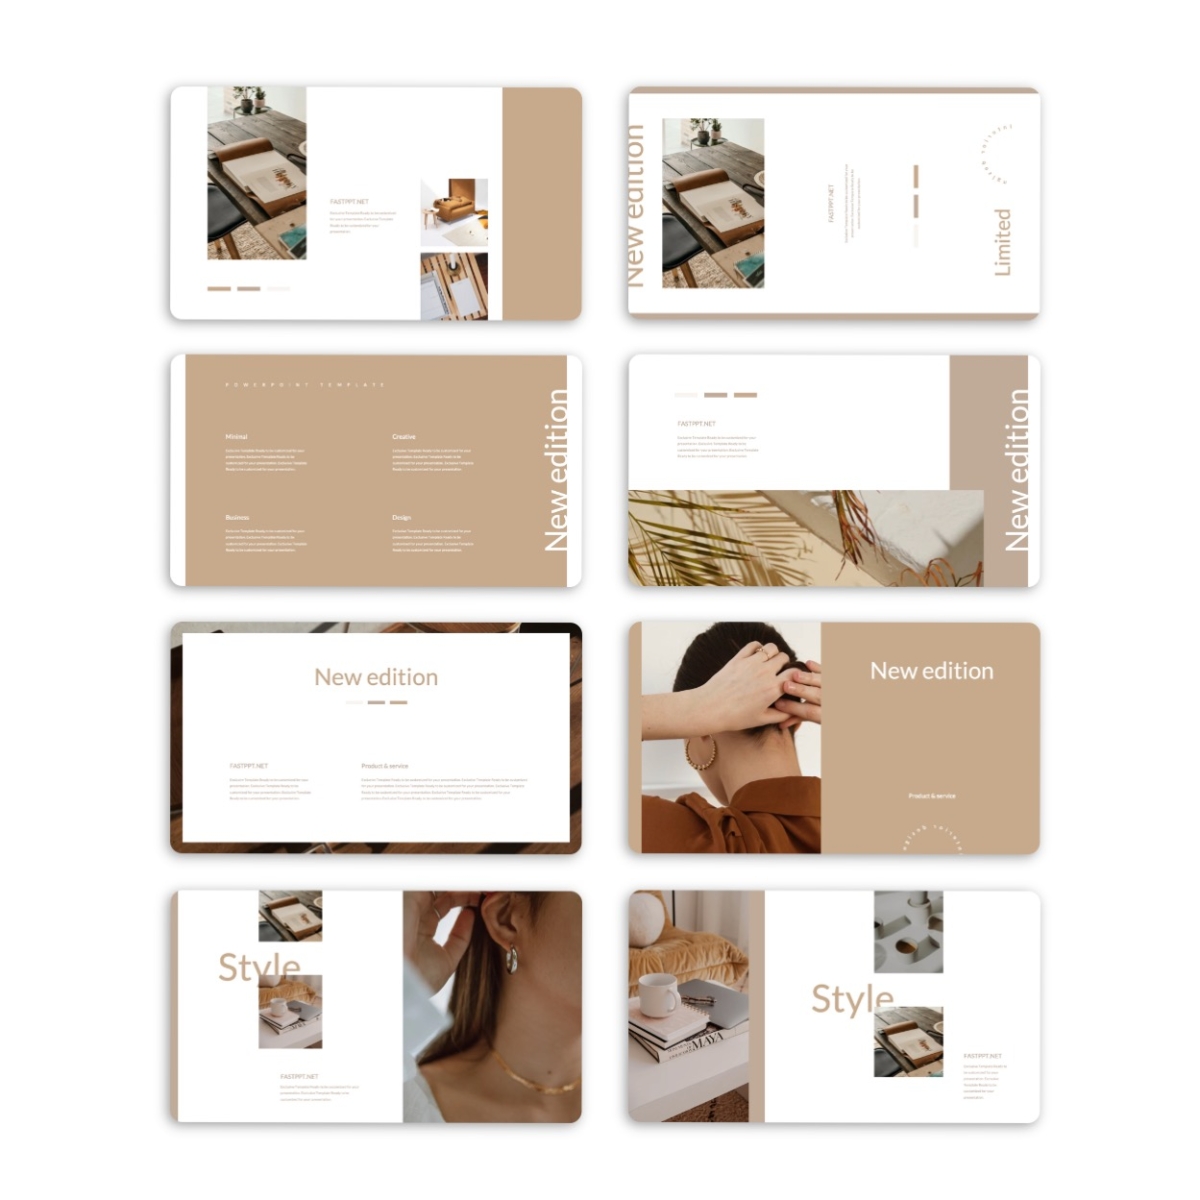 design templates for powerpoint 2022